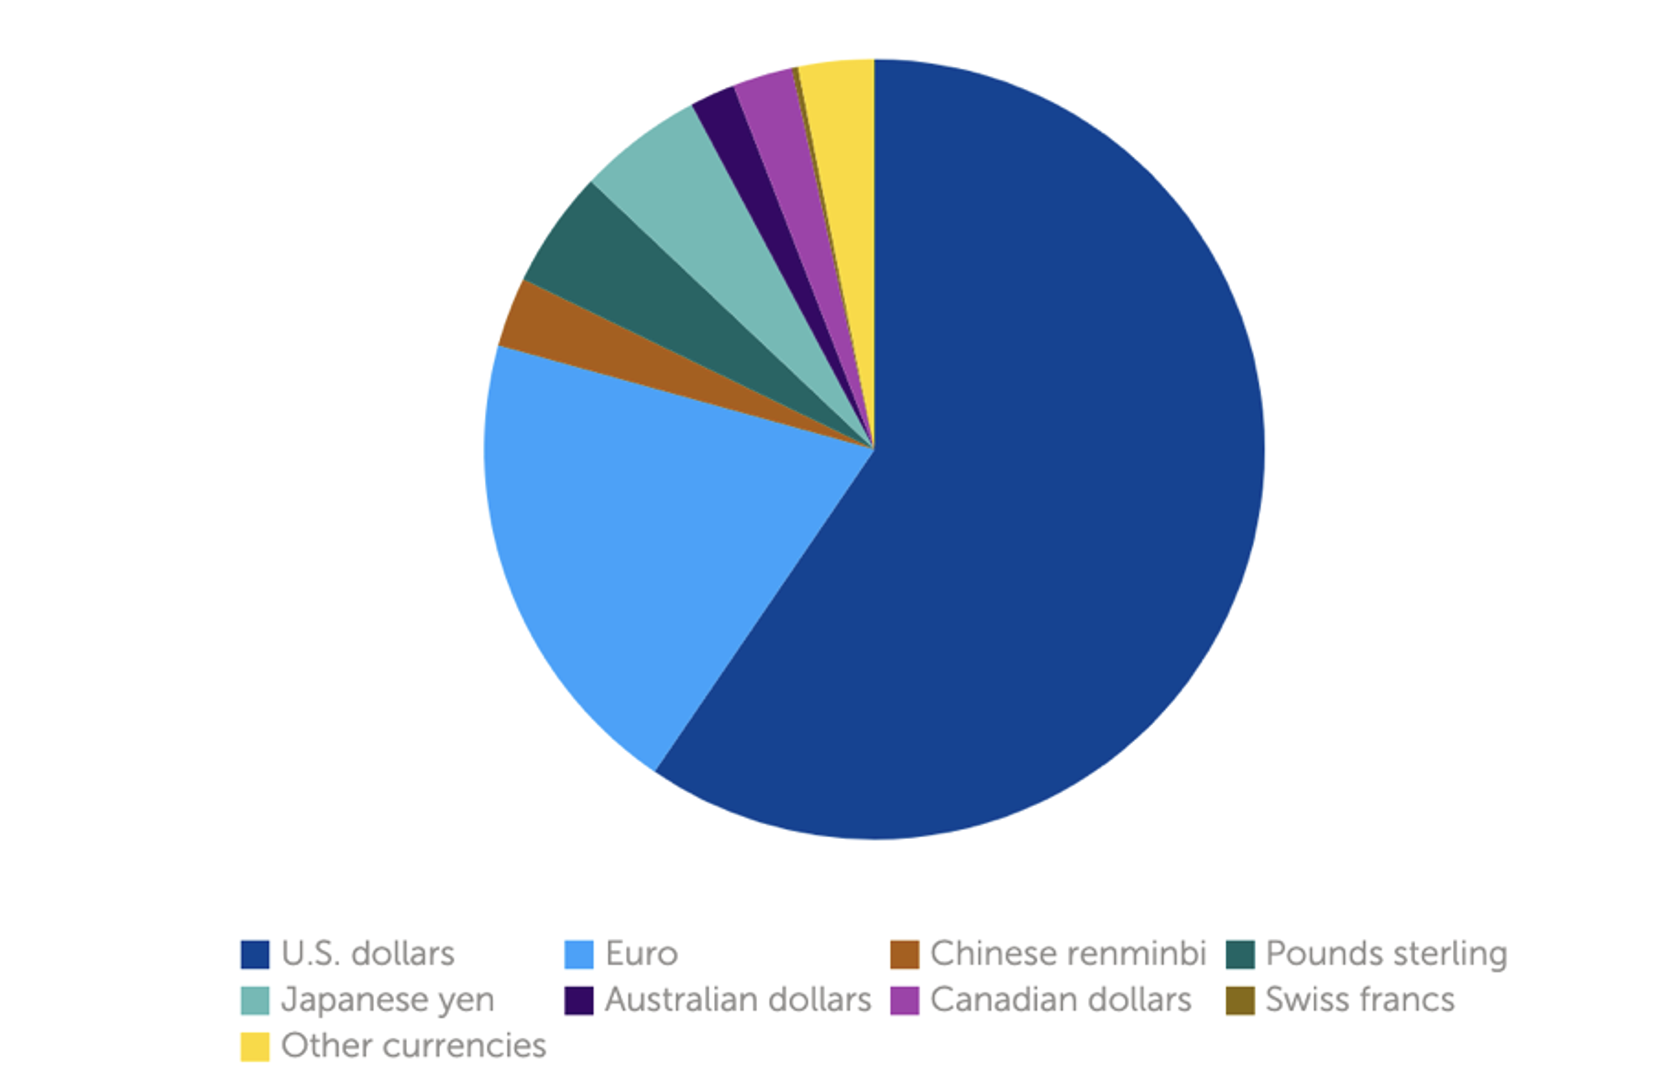 Figure 1 Currency composition of global foreign exchange reserves